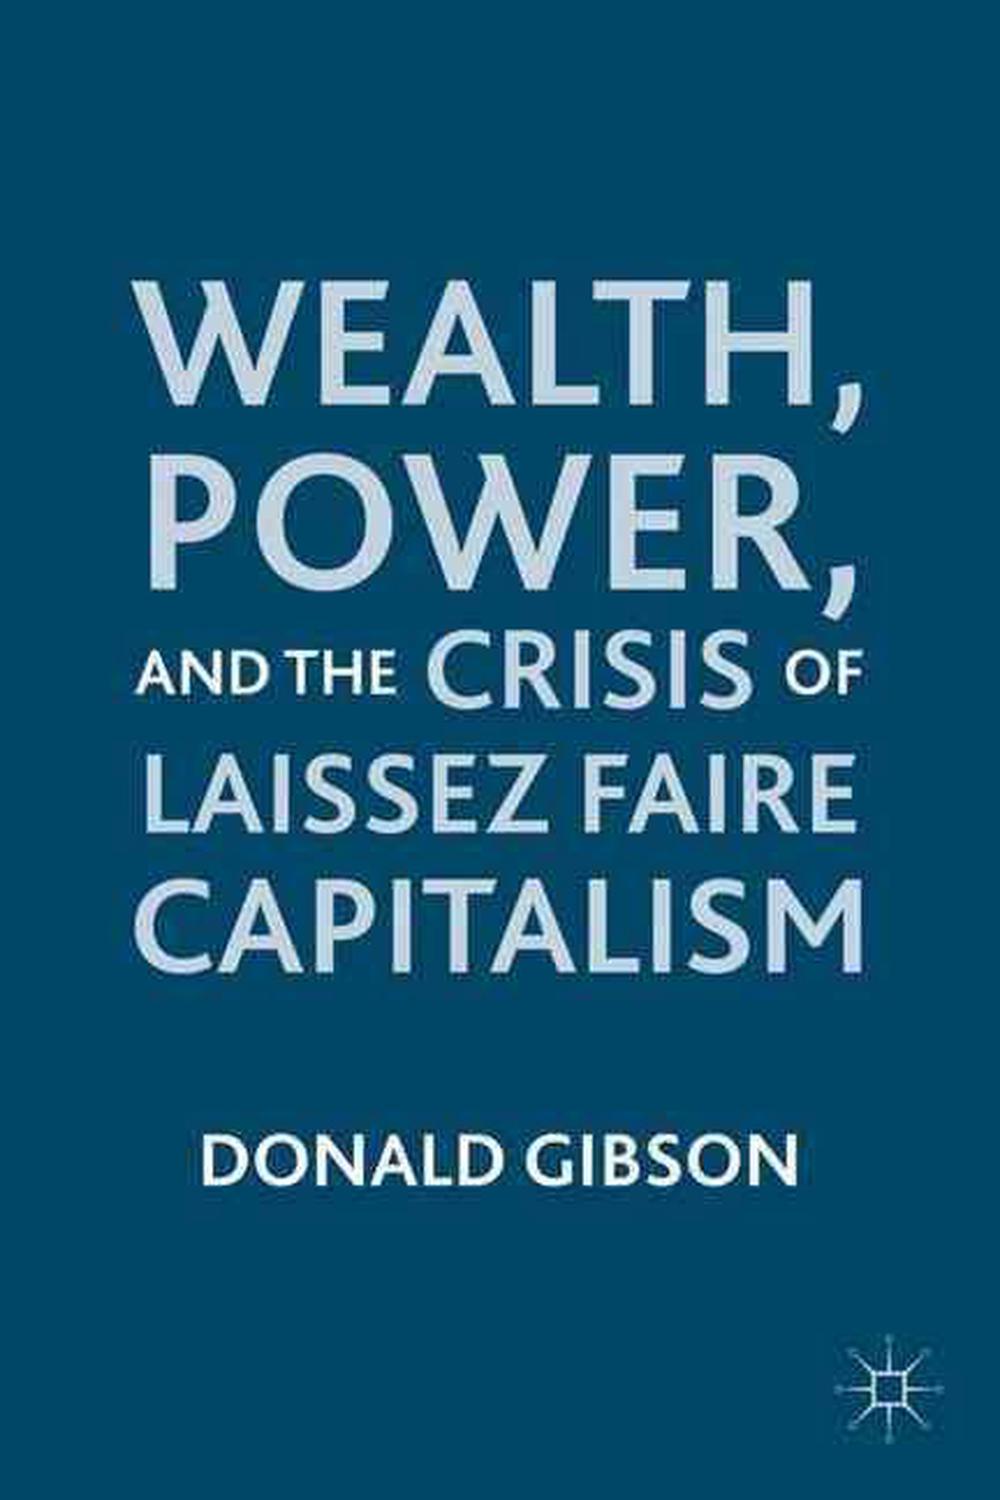 Wealth, Power, and the Crisis of Laissez Faire Capitalism by Donald